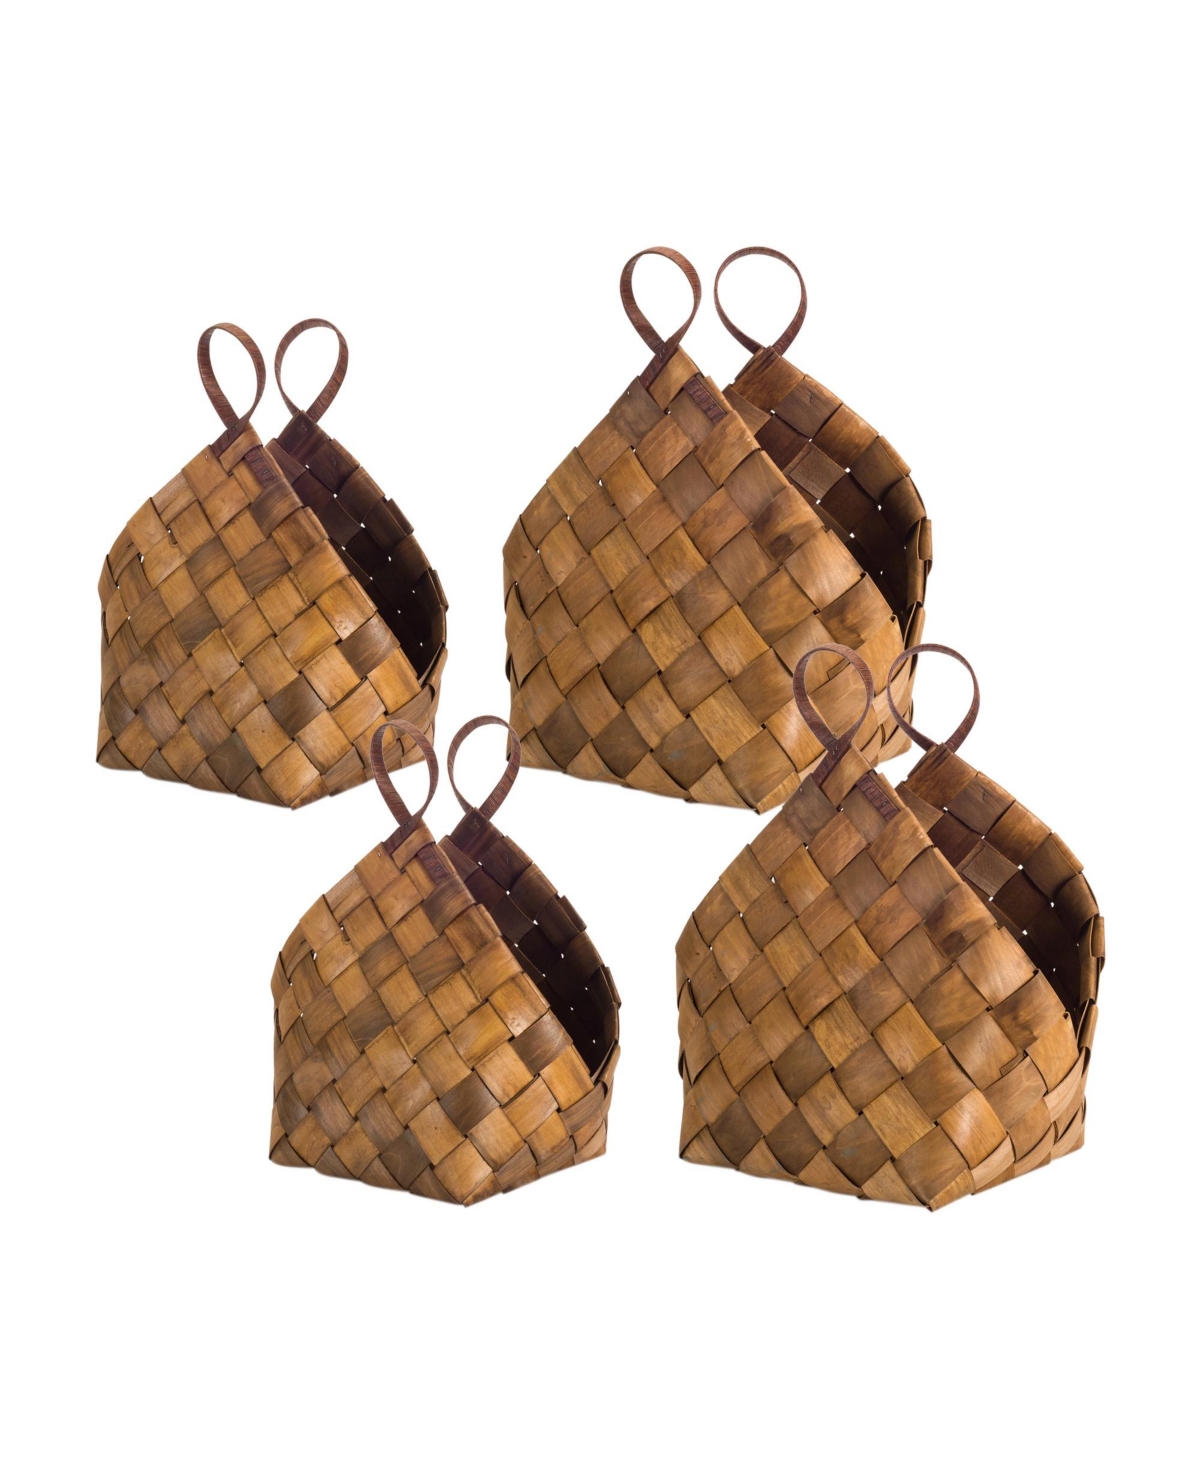 Set of 4 Woven Metasequoia Wood Baskets with Handles - Brown